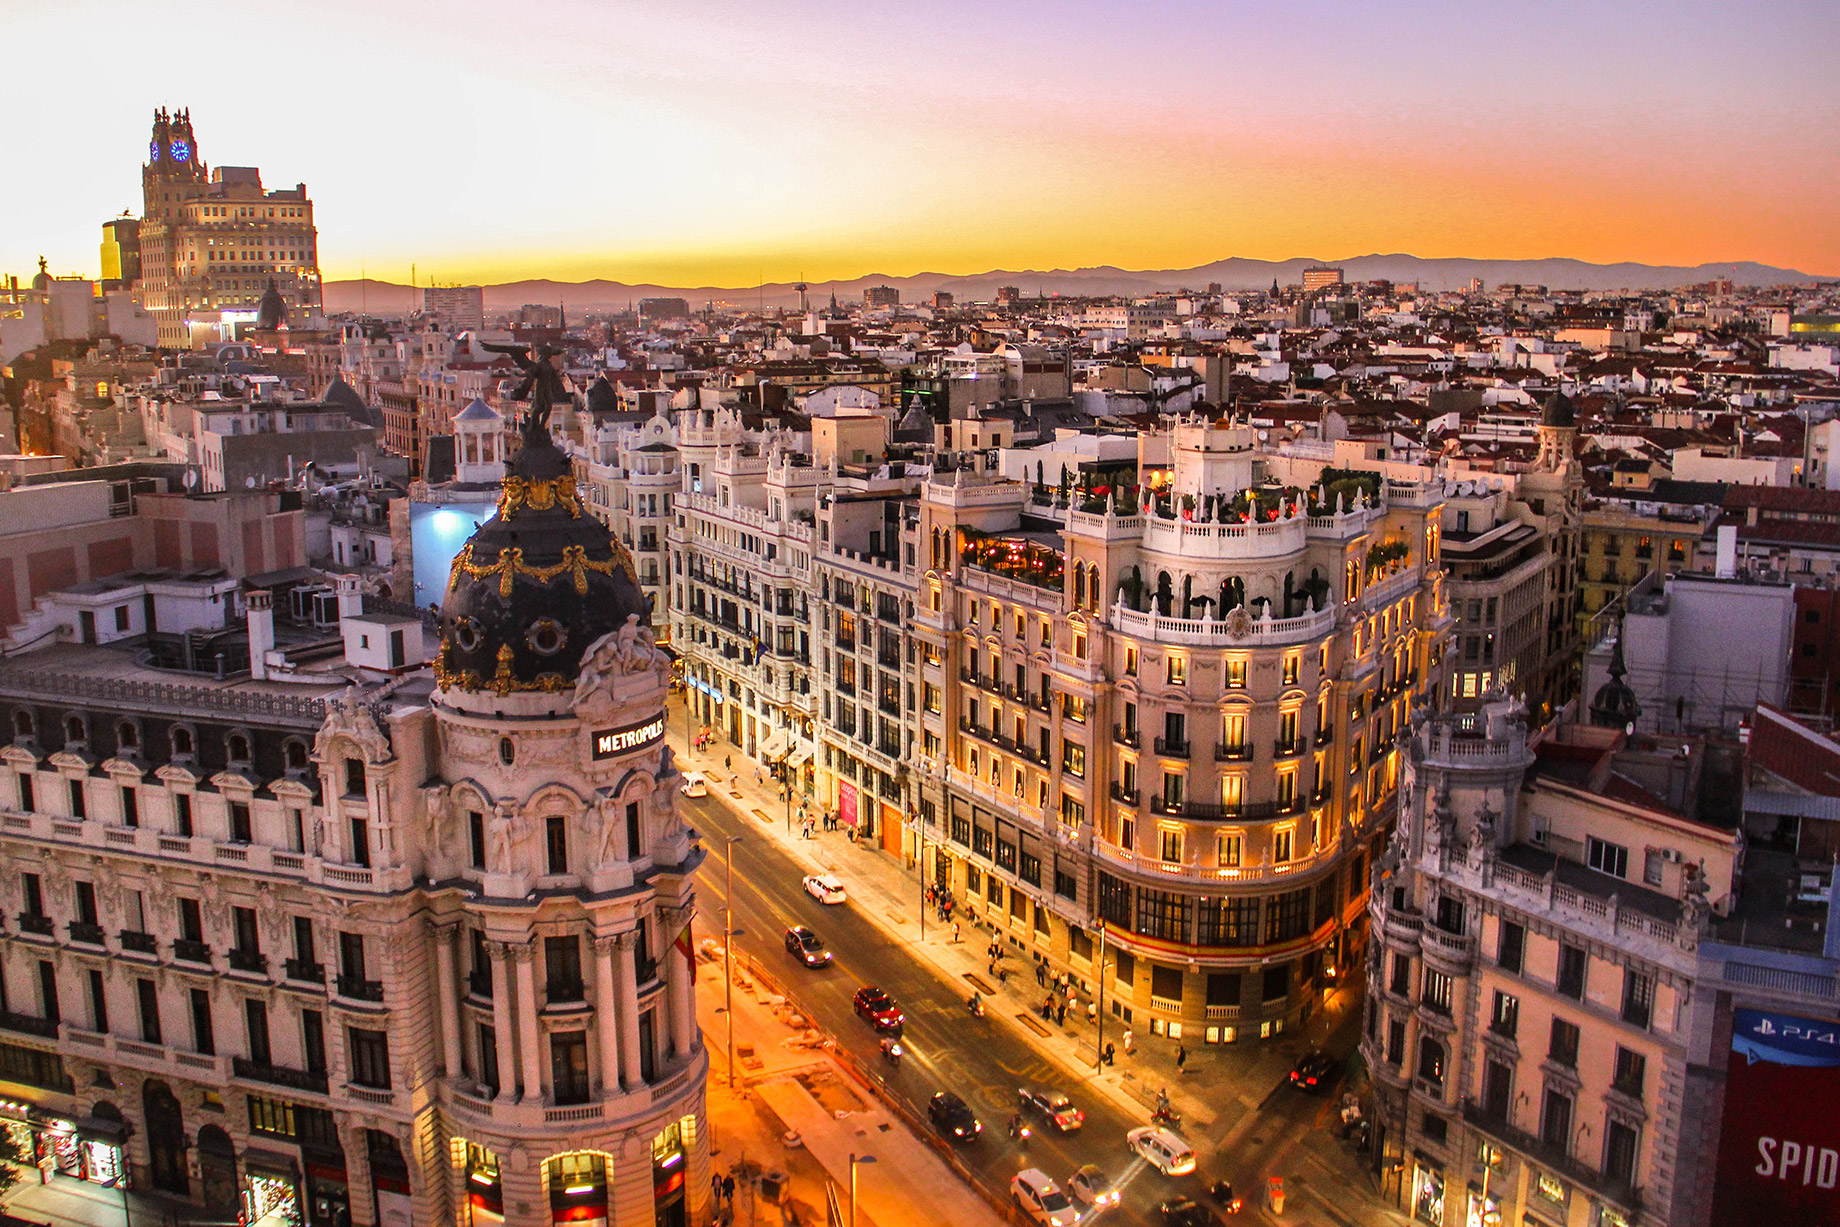 Madrid, Spain – The Most Expensive Real Estate Cities in the World